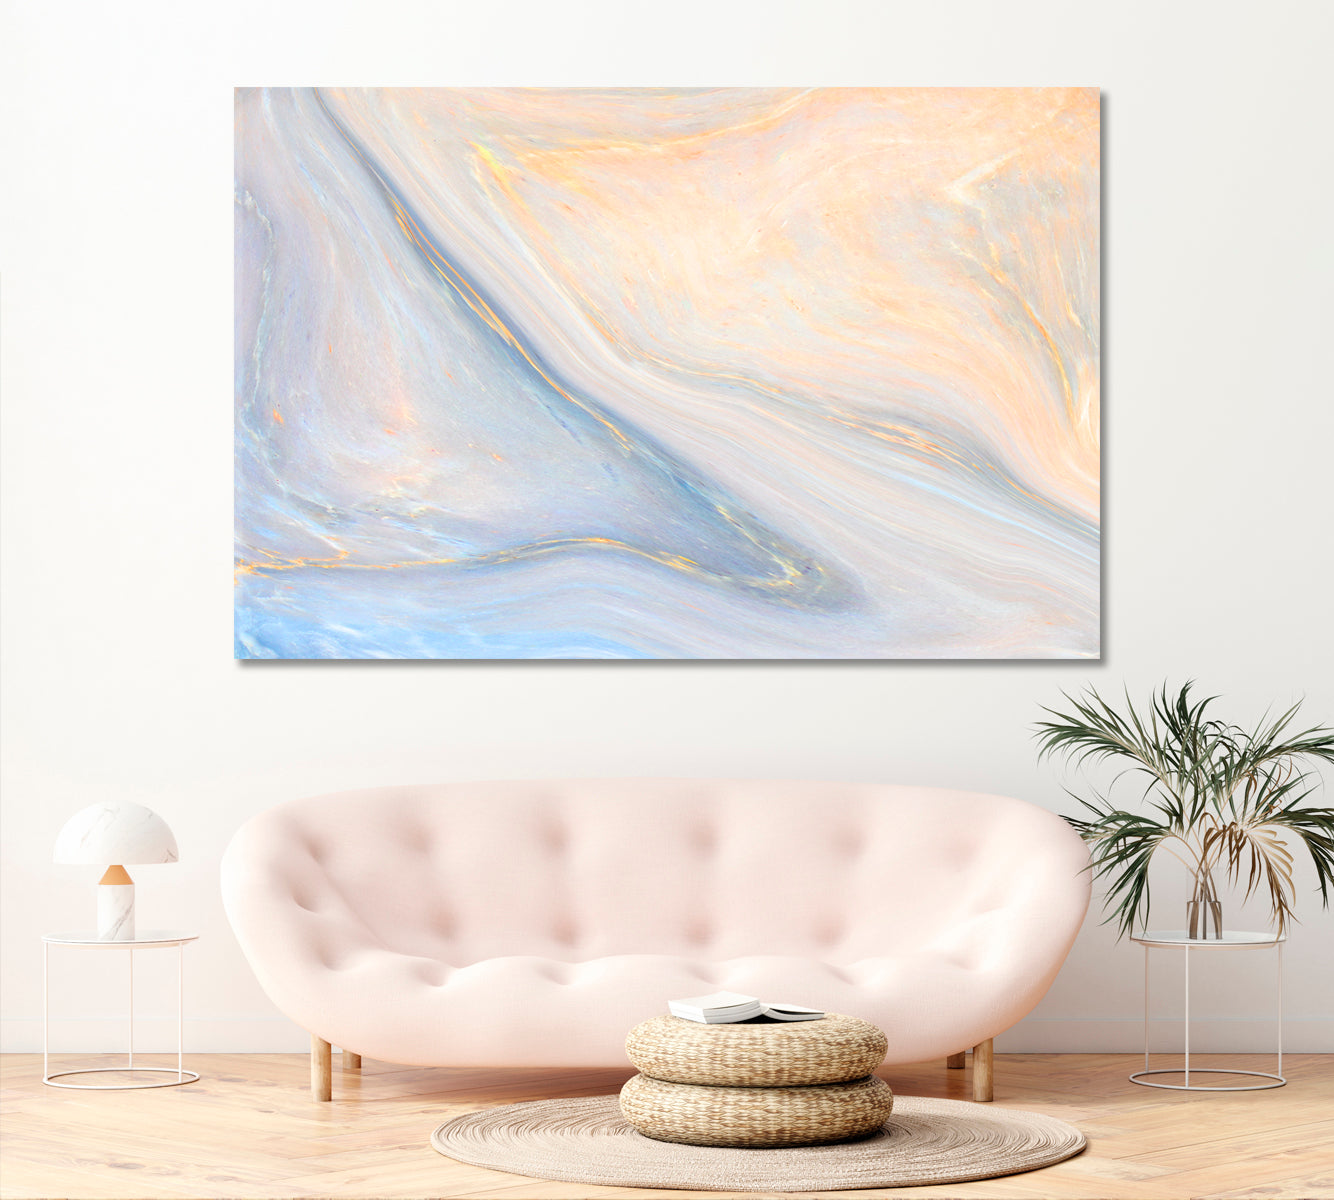 Luxury Marble with Golden Veins Canvas Print ArtLexy 1 Panel 24"x16" inches 